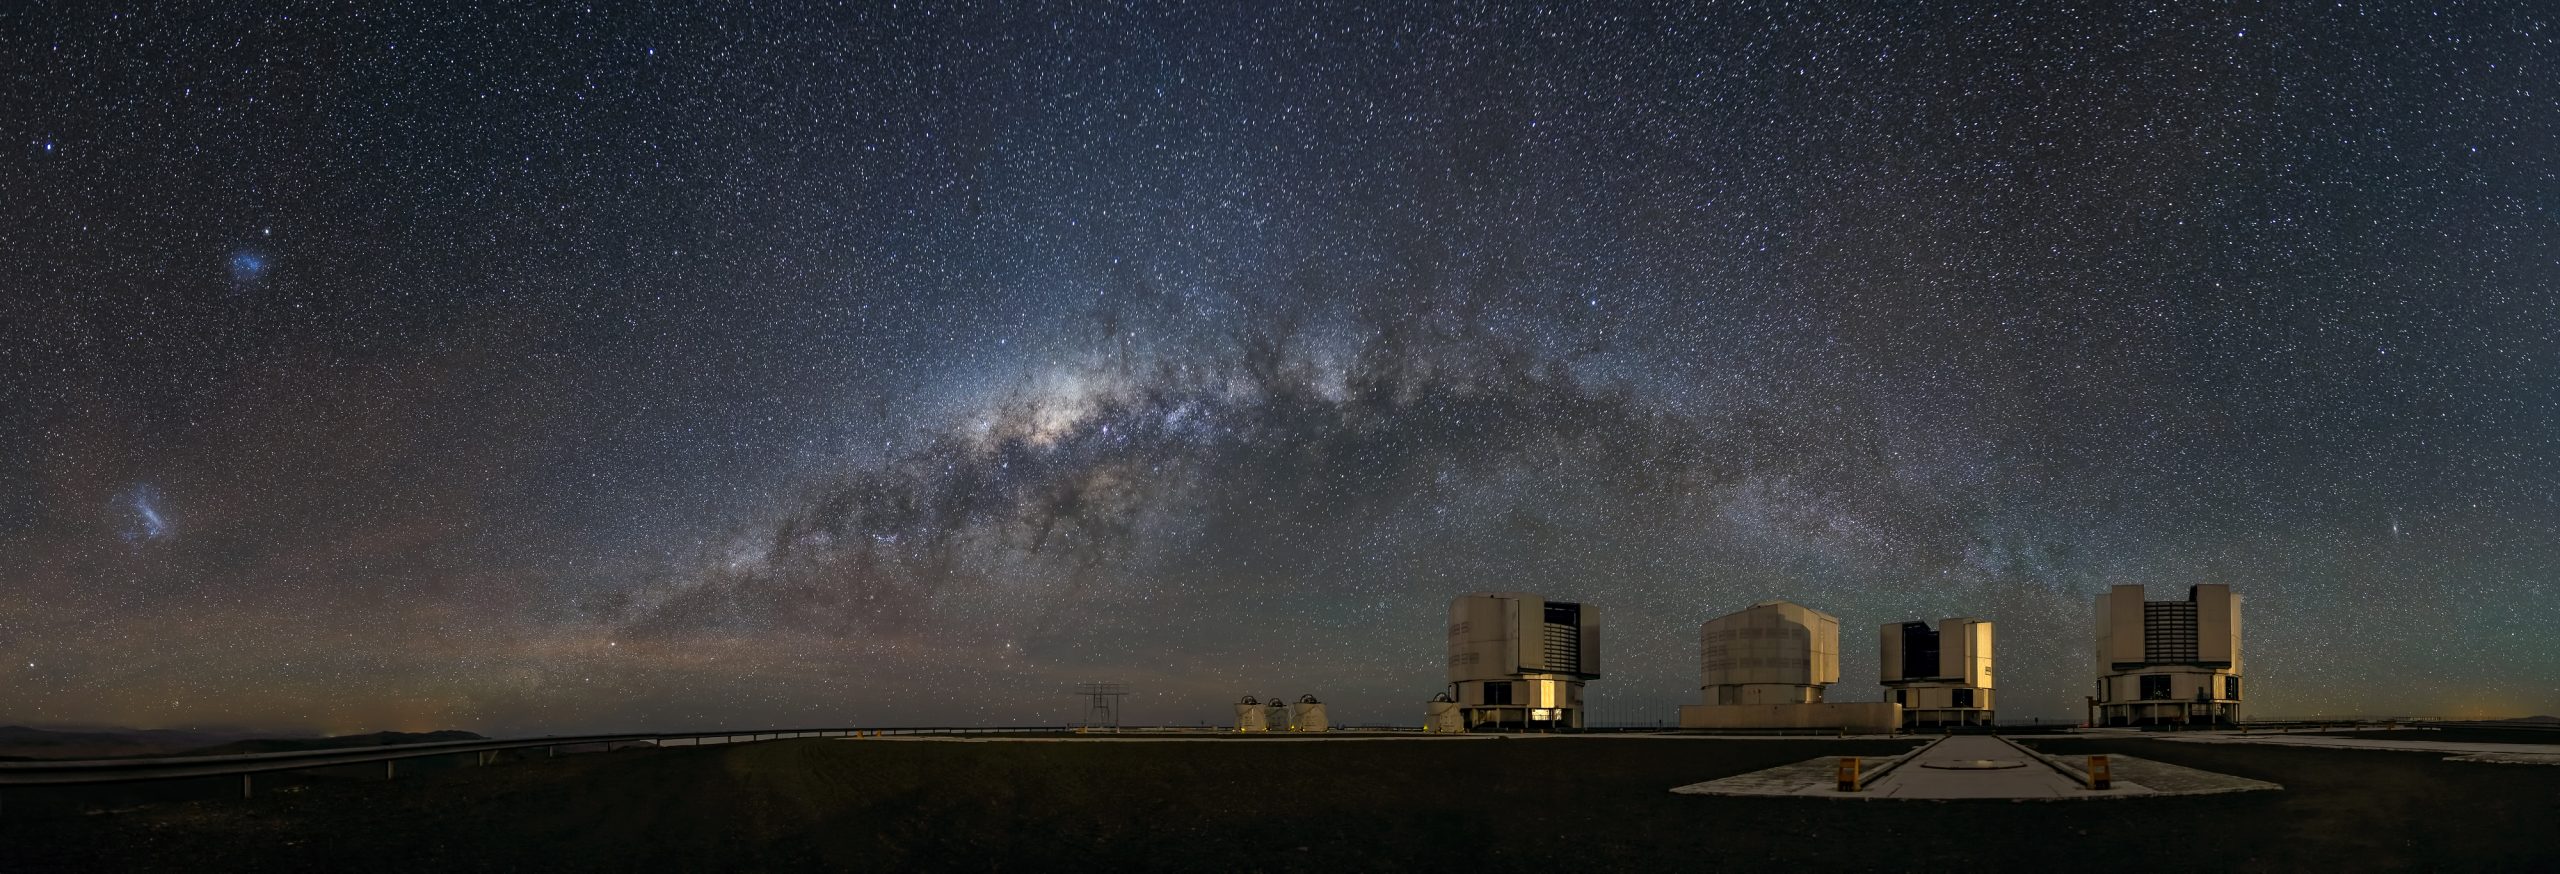 Australian-based astronomers to take a deep dive into the cosmos with time awarded on one of ESO’s most powerful instruments